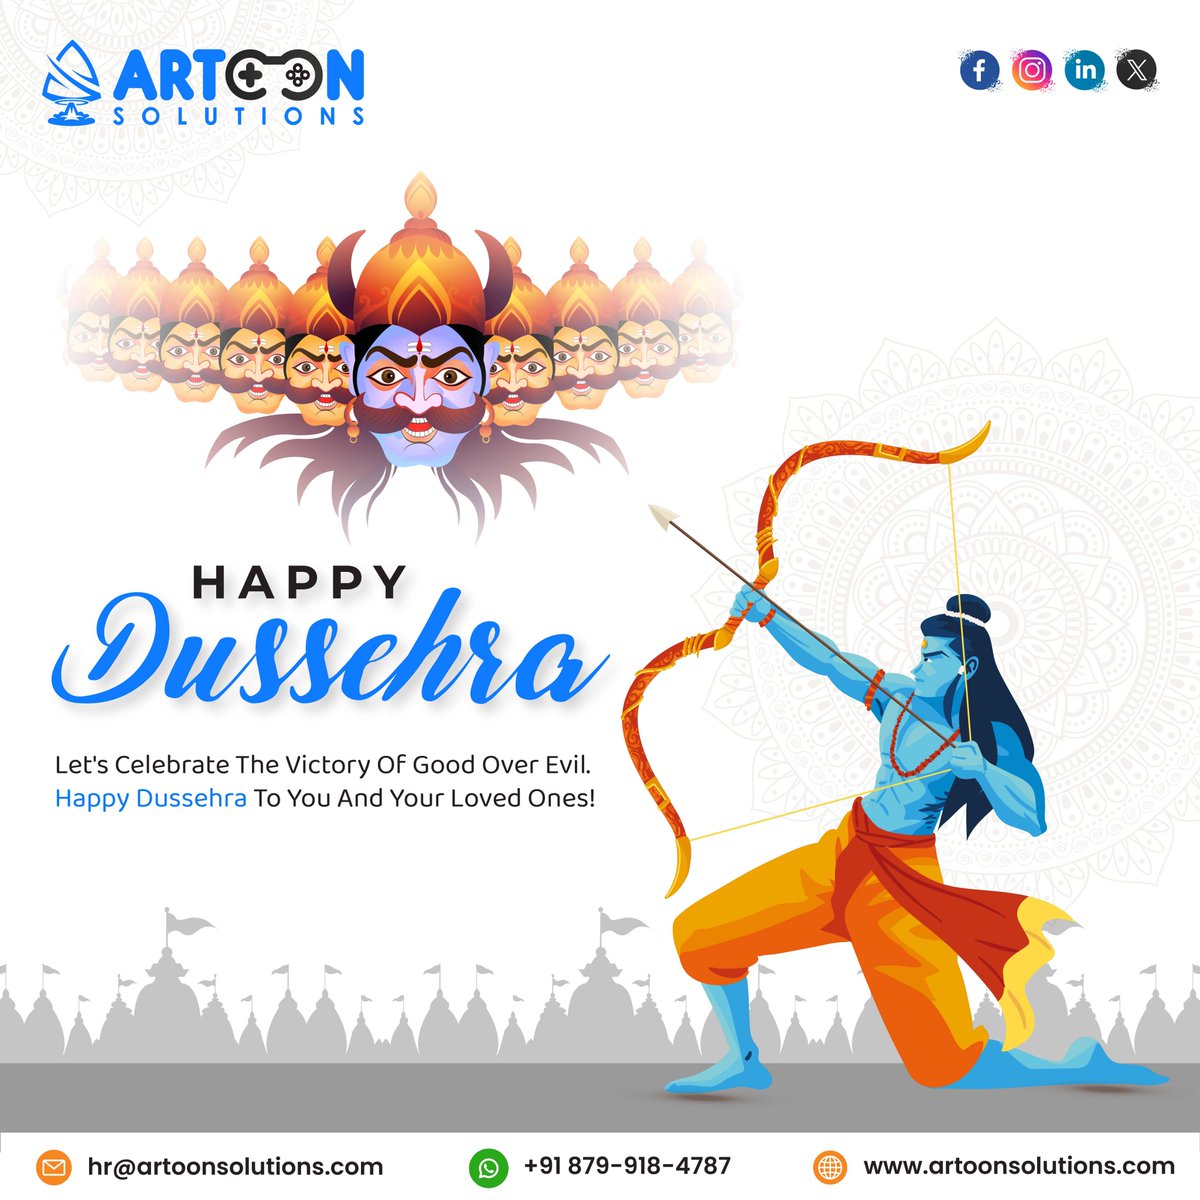 Happy Dussehra 🙌

Dussehra is a reminder that no matter how powerful evil may seem, goodness always prevails. 🙏🔥

#VictoryOfGood #Dussehra #dussehra2023 #VijayaDashami #VijayaDashami2023 #Dussehrawishes #Dussehrafestival #artoonsolutions